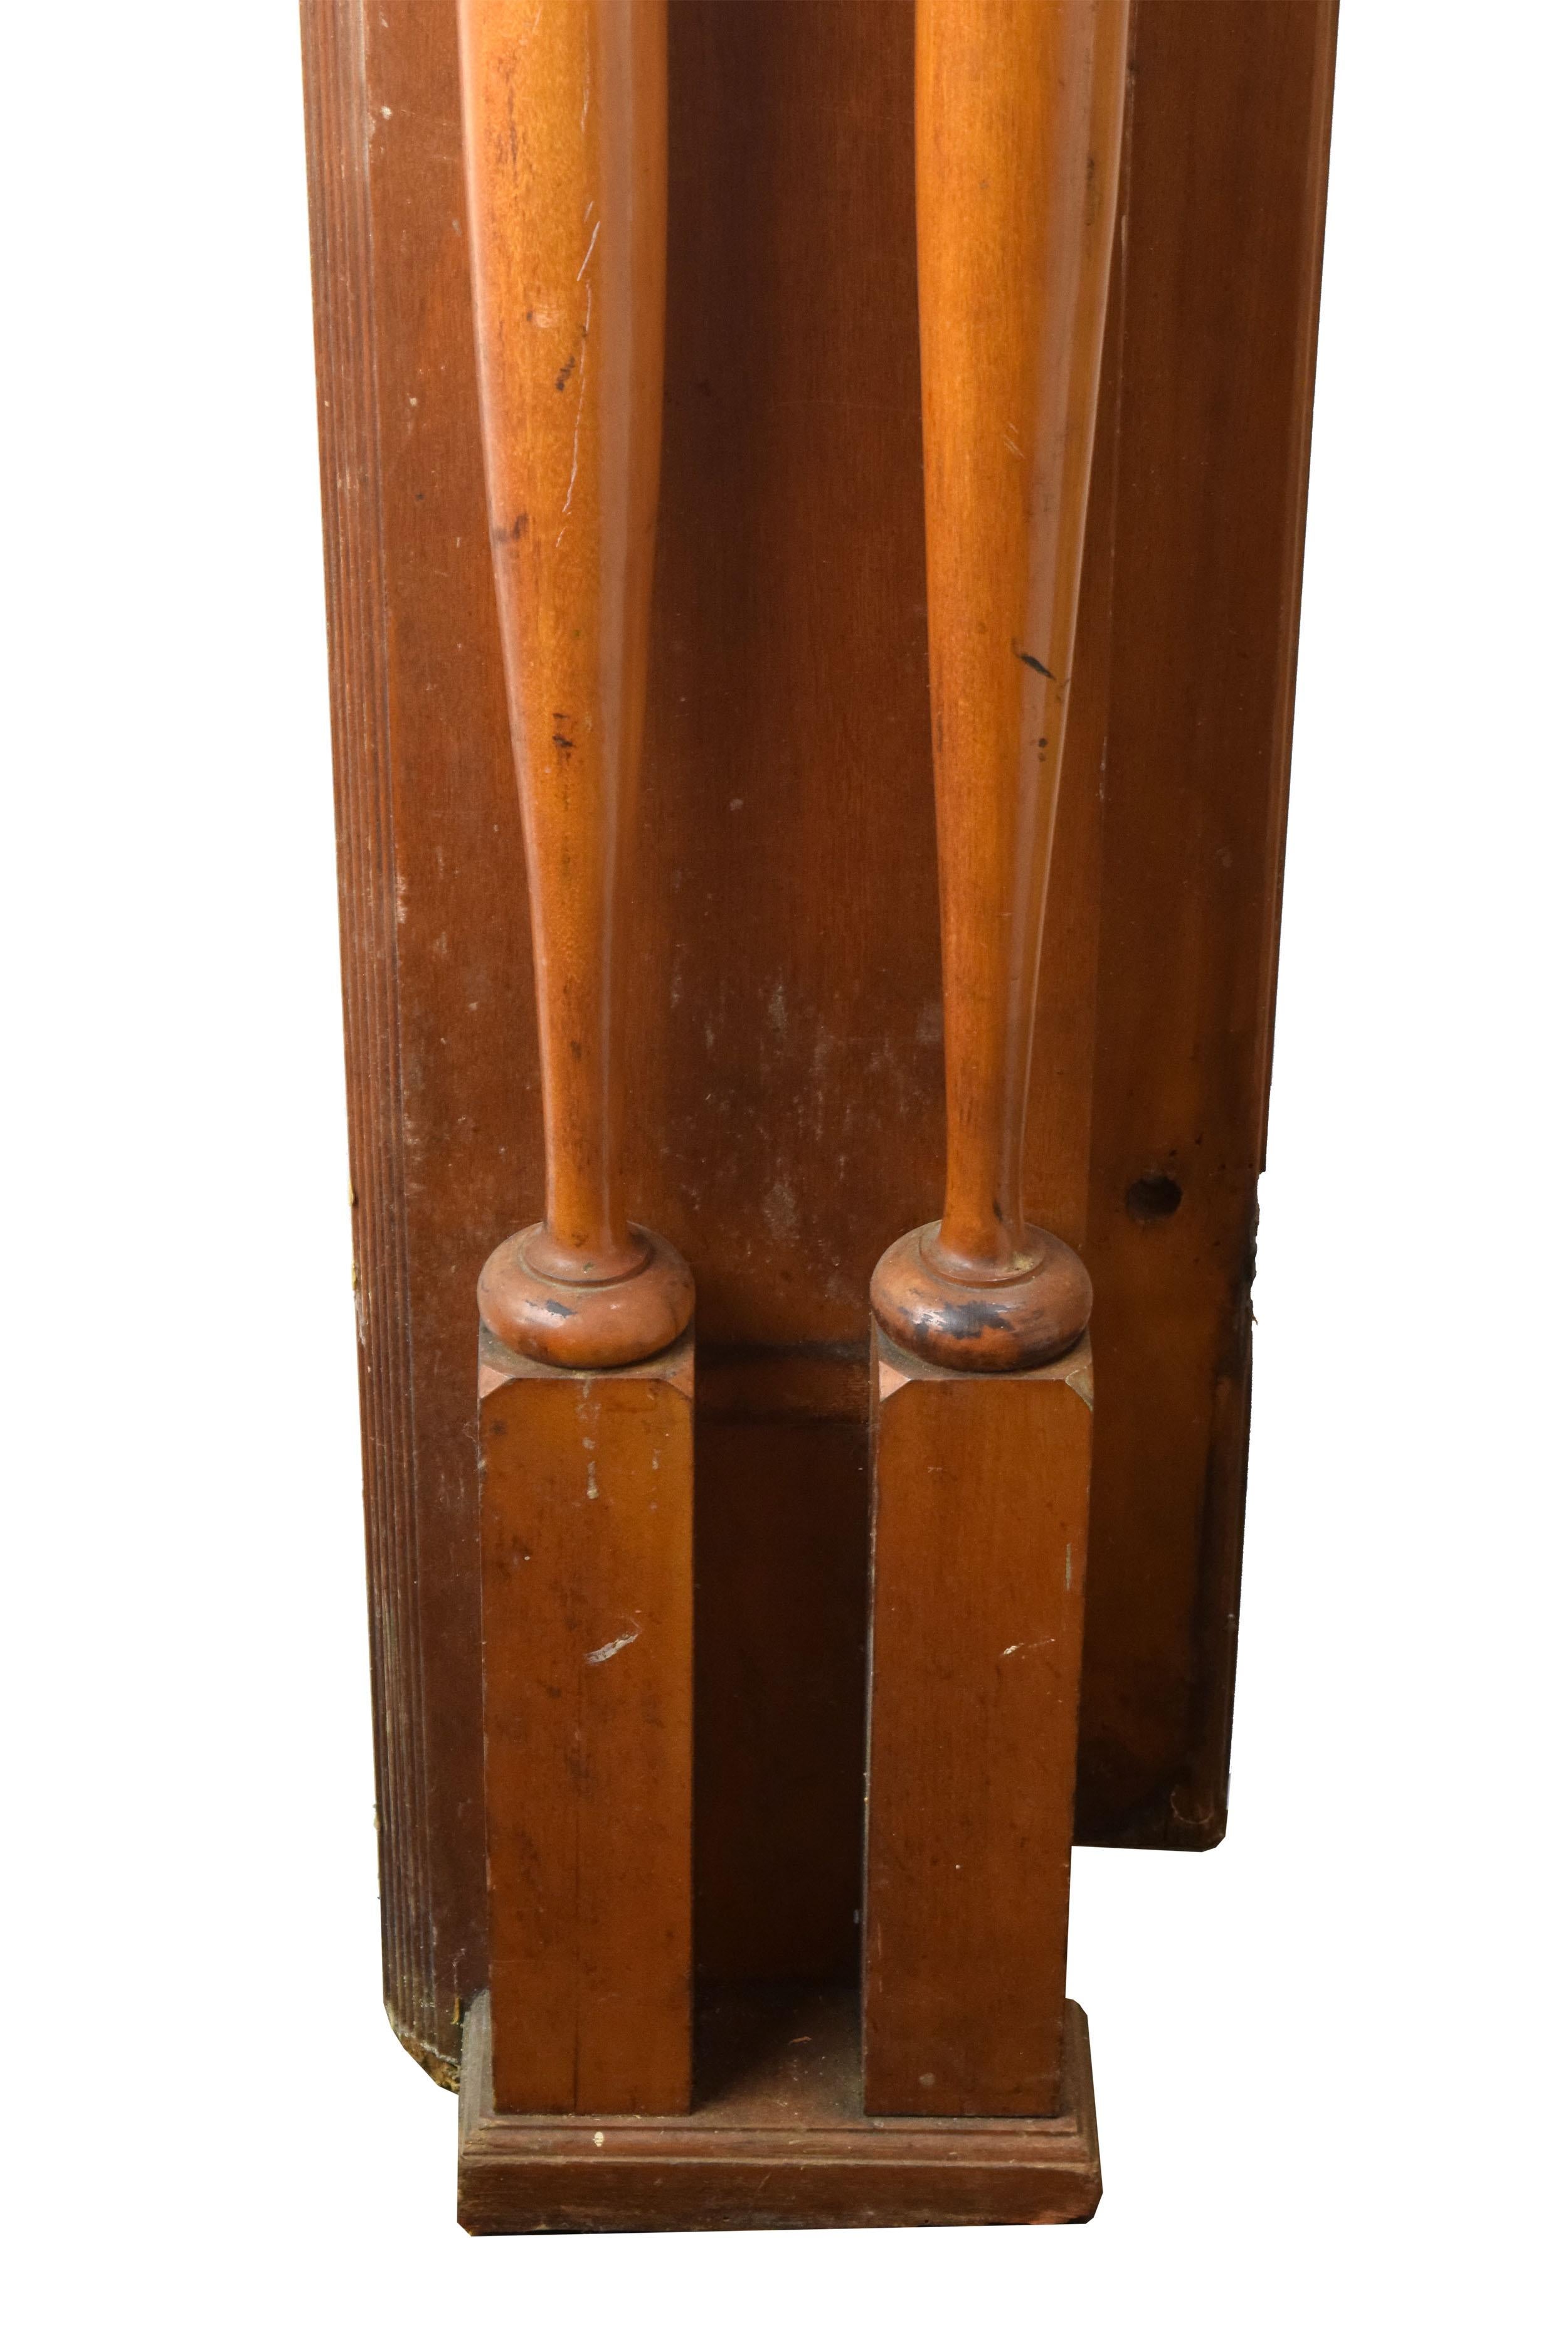 20th Century Maple Mantel with Carved Spindles